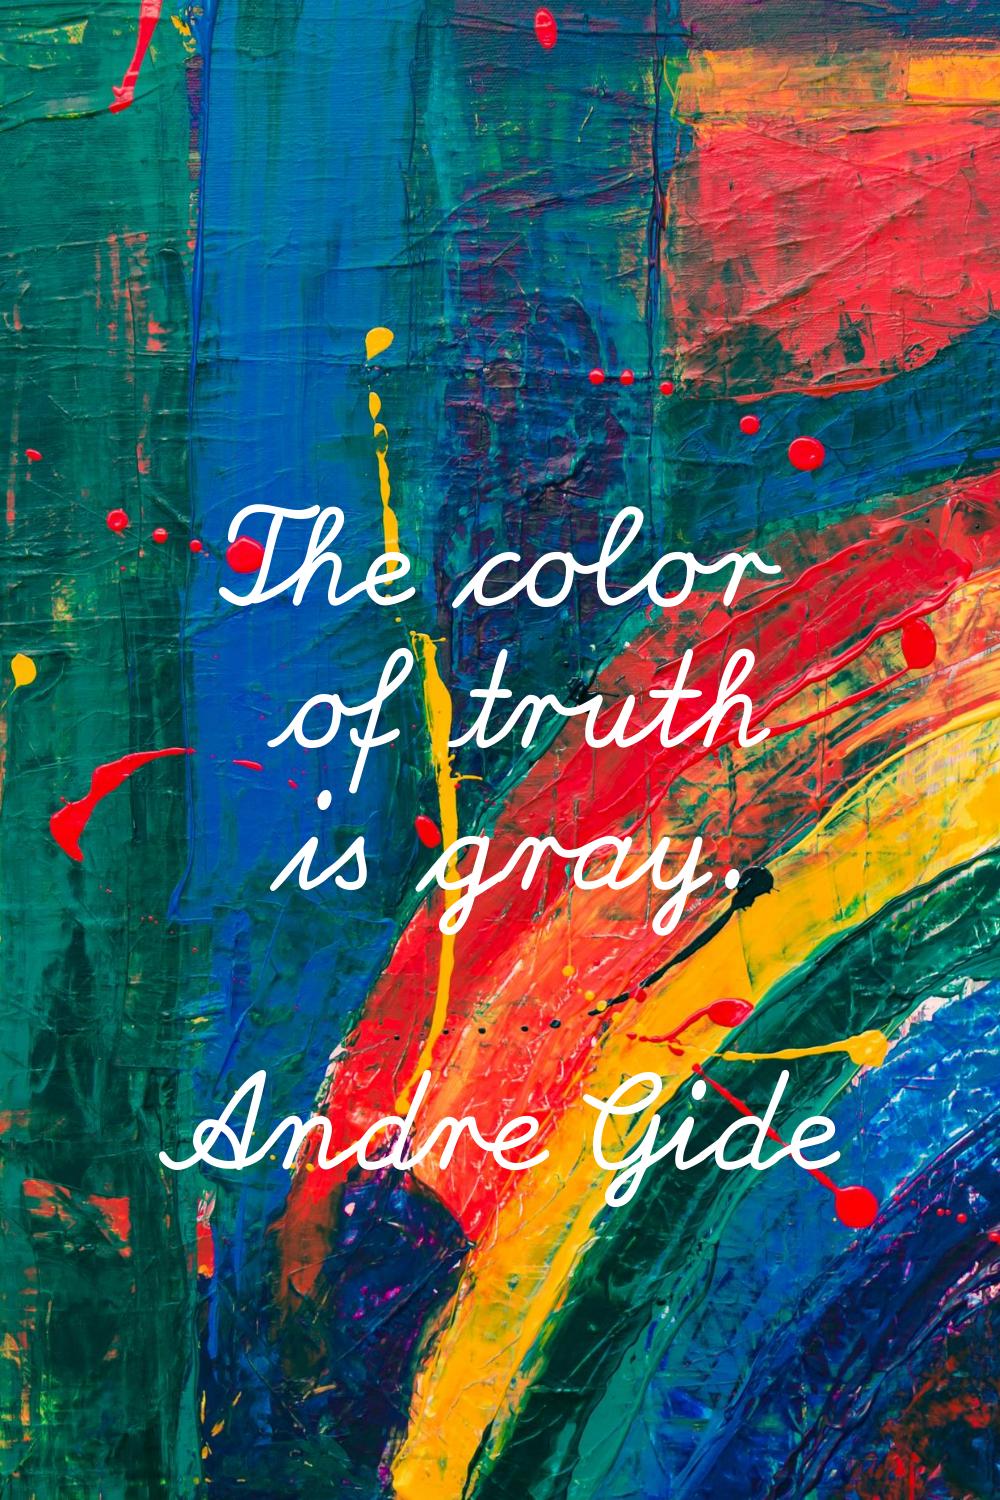 The color of truth is gray.